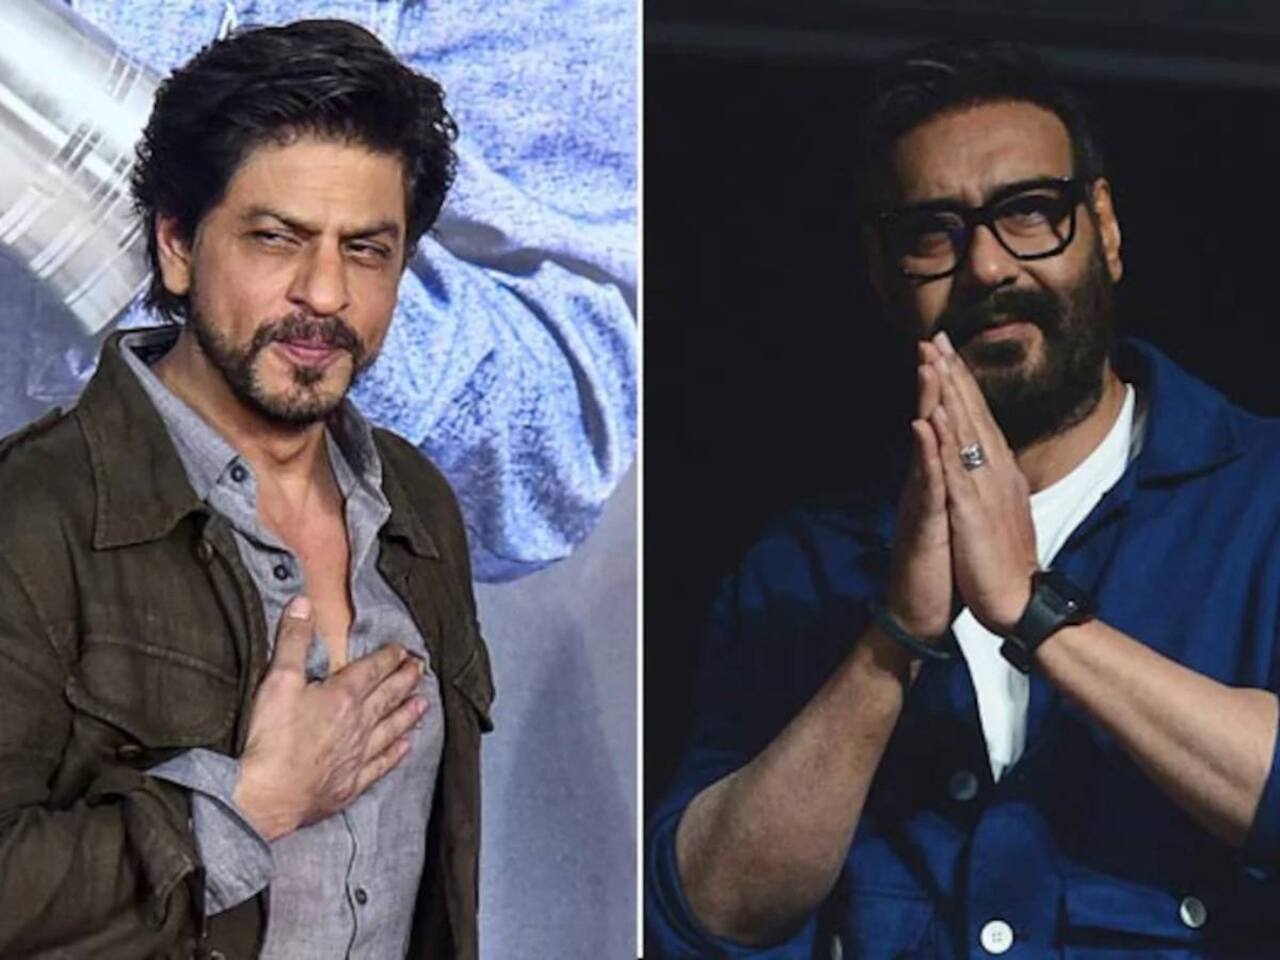 Pathaan box office: Ajay Devgn reacts to film’s fantastic response in advance booking; Shah Rukh Khan calls him a pillar of support